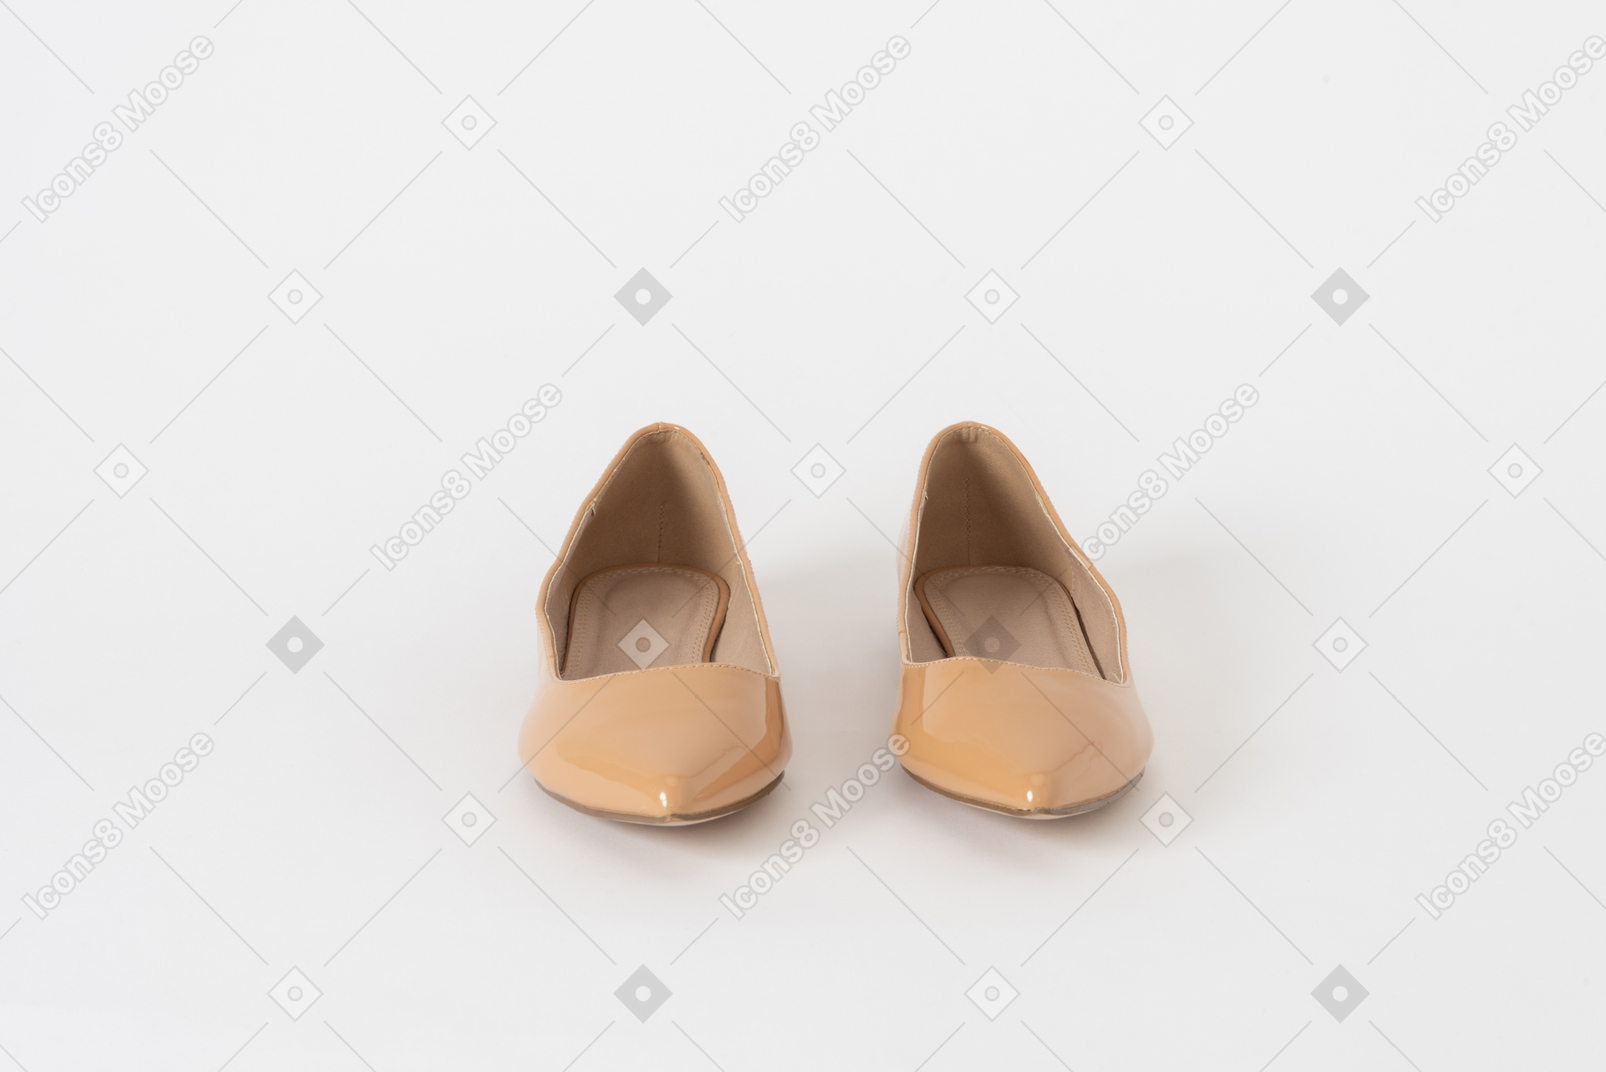 A front shot of a pair of beige lacquer low heel shoes